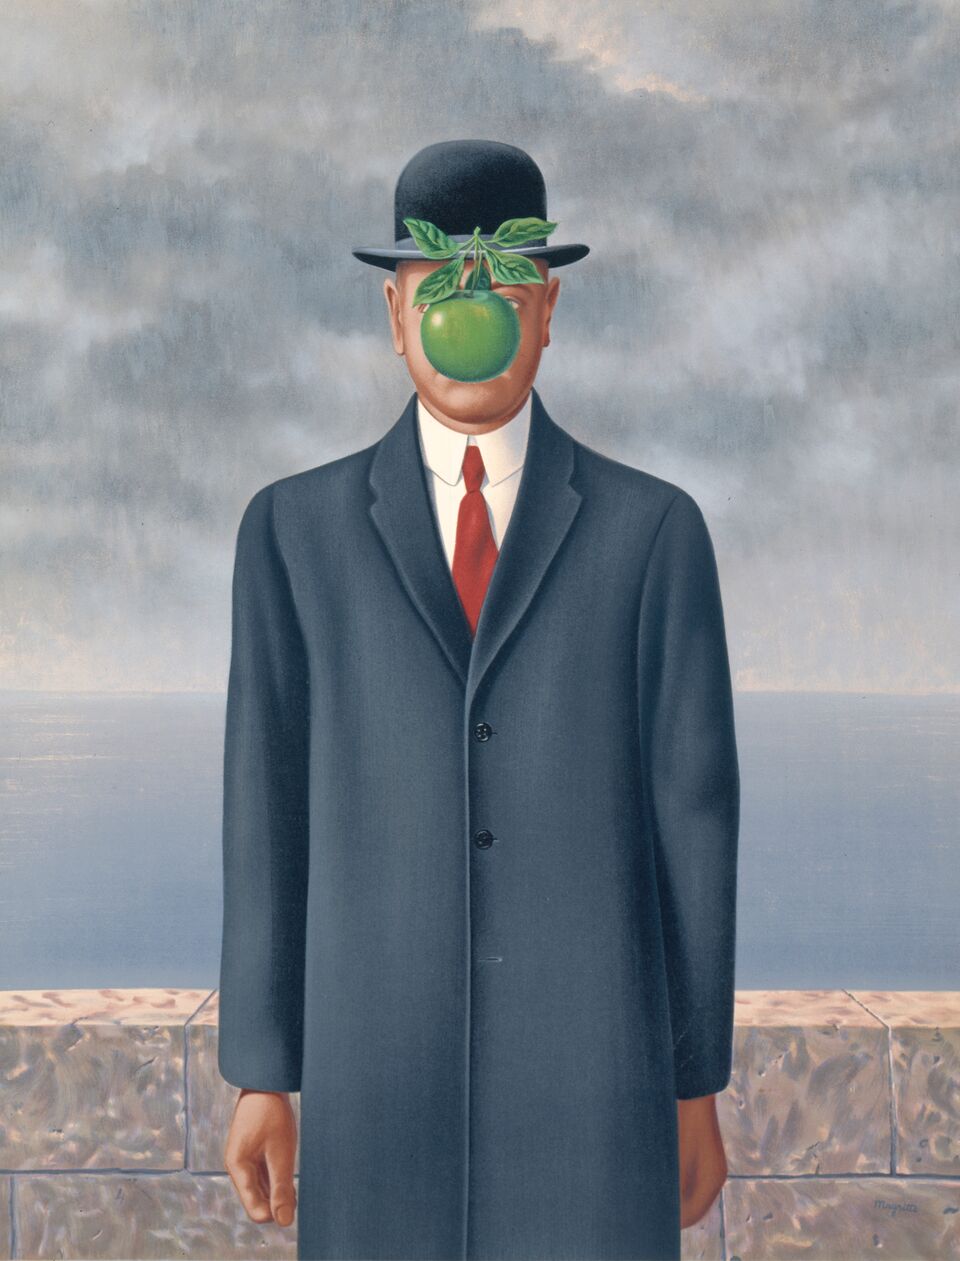 2. Rene Magritte The Son of Man